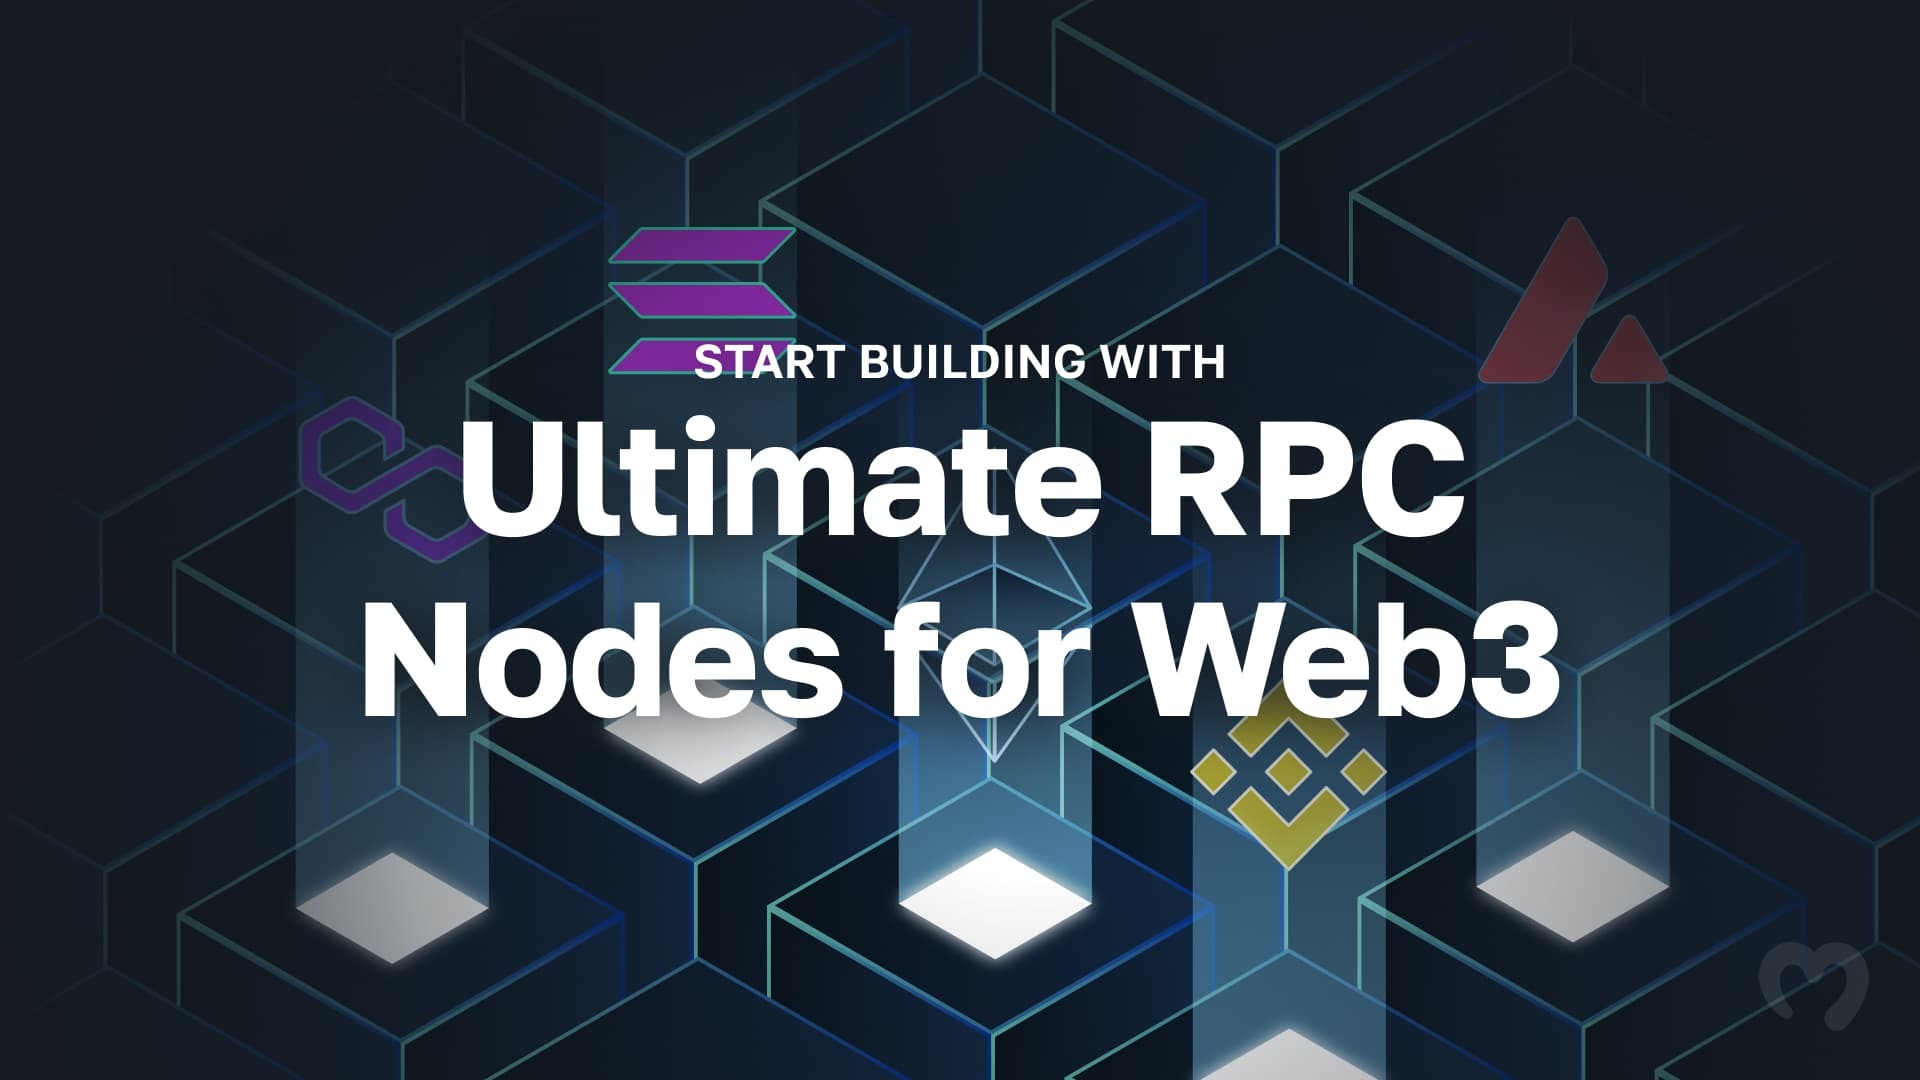 Nodes with text overlay: "Ultimate RPC Nodes for Web3"